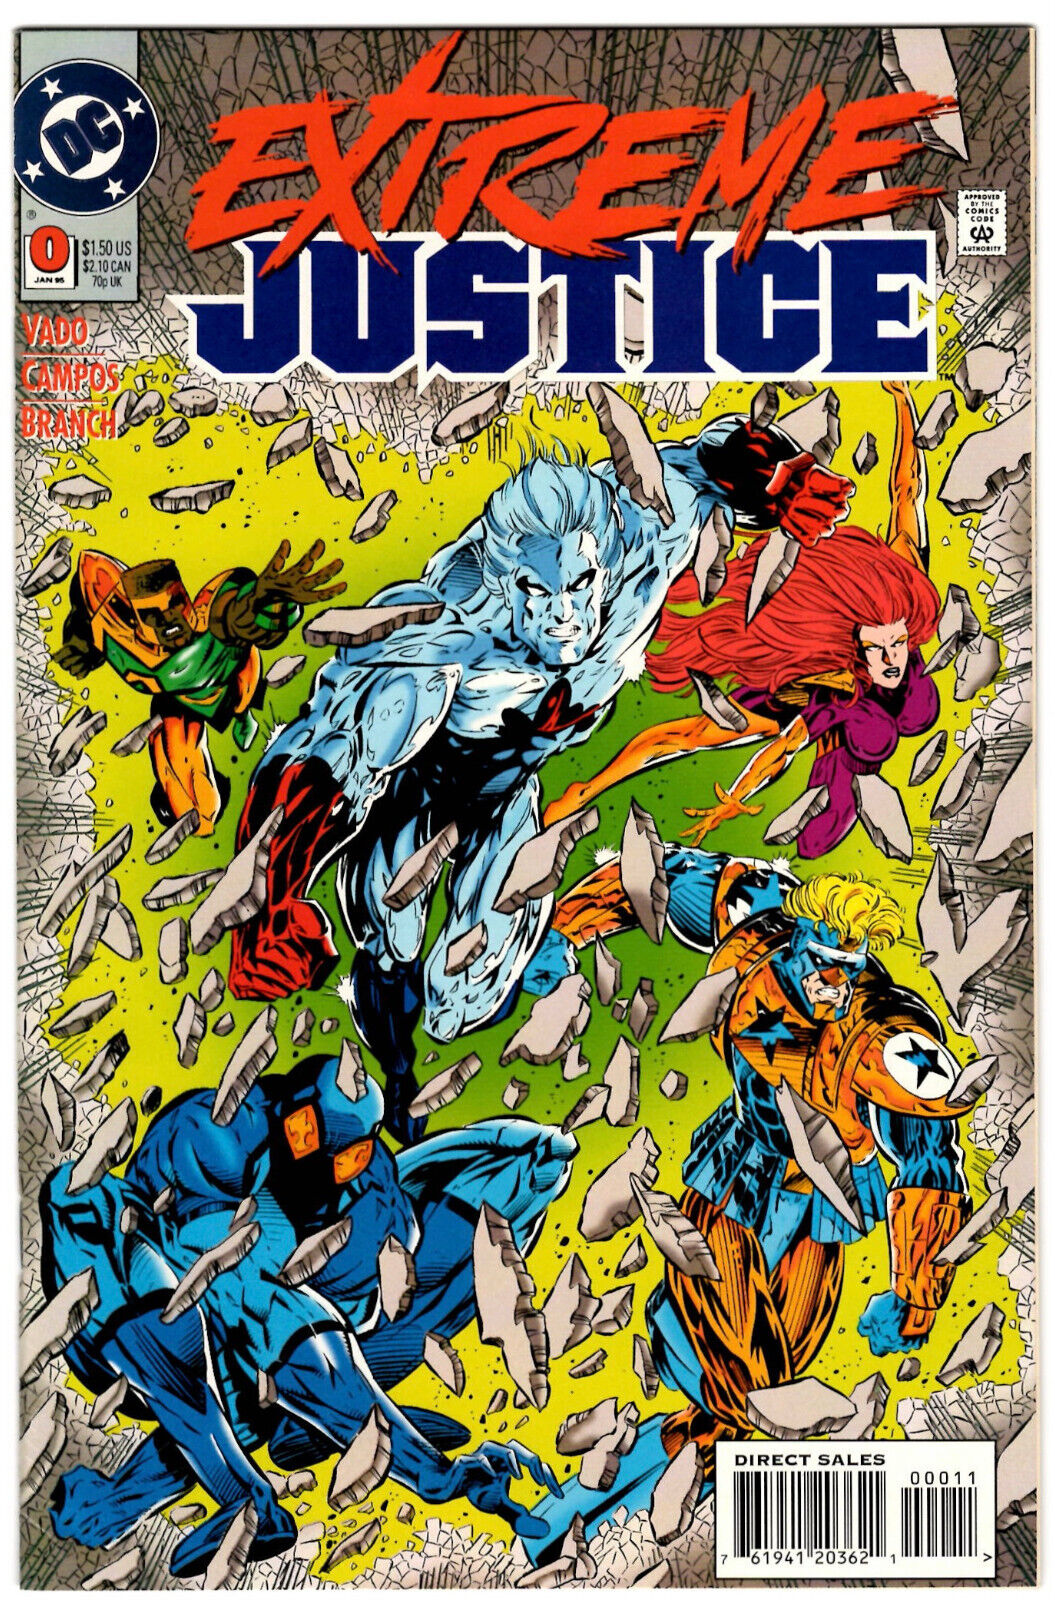 EXTREME JUSTICE #0 - JANUARY 1995 - HIGH GRADE MODERN AGE DC COMICS CLASSIC